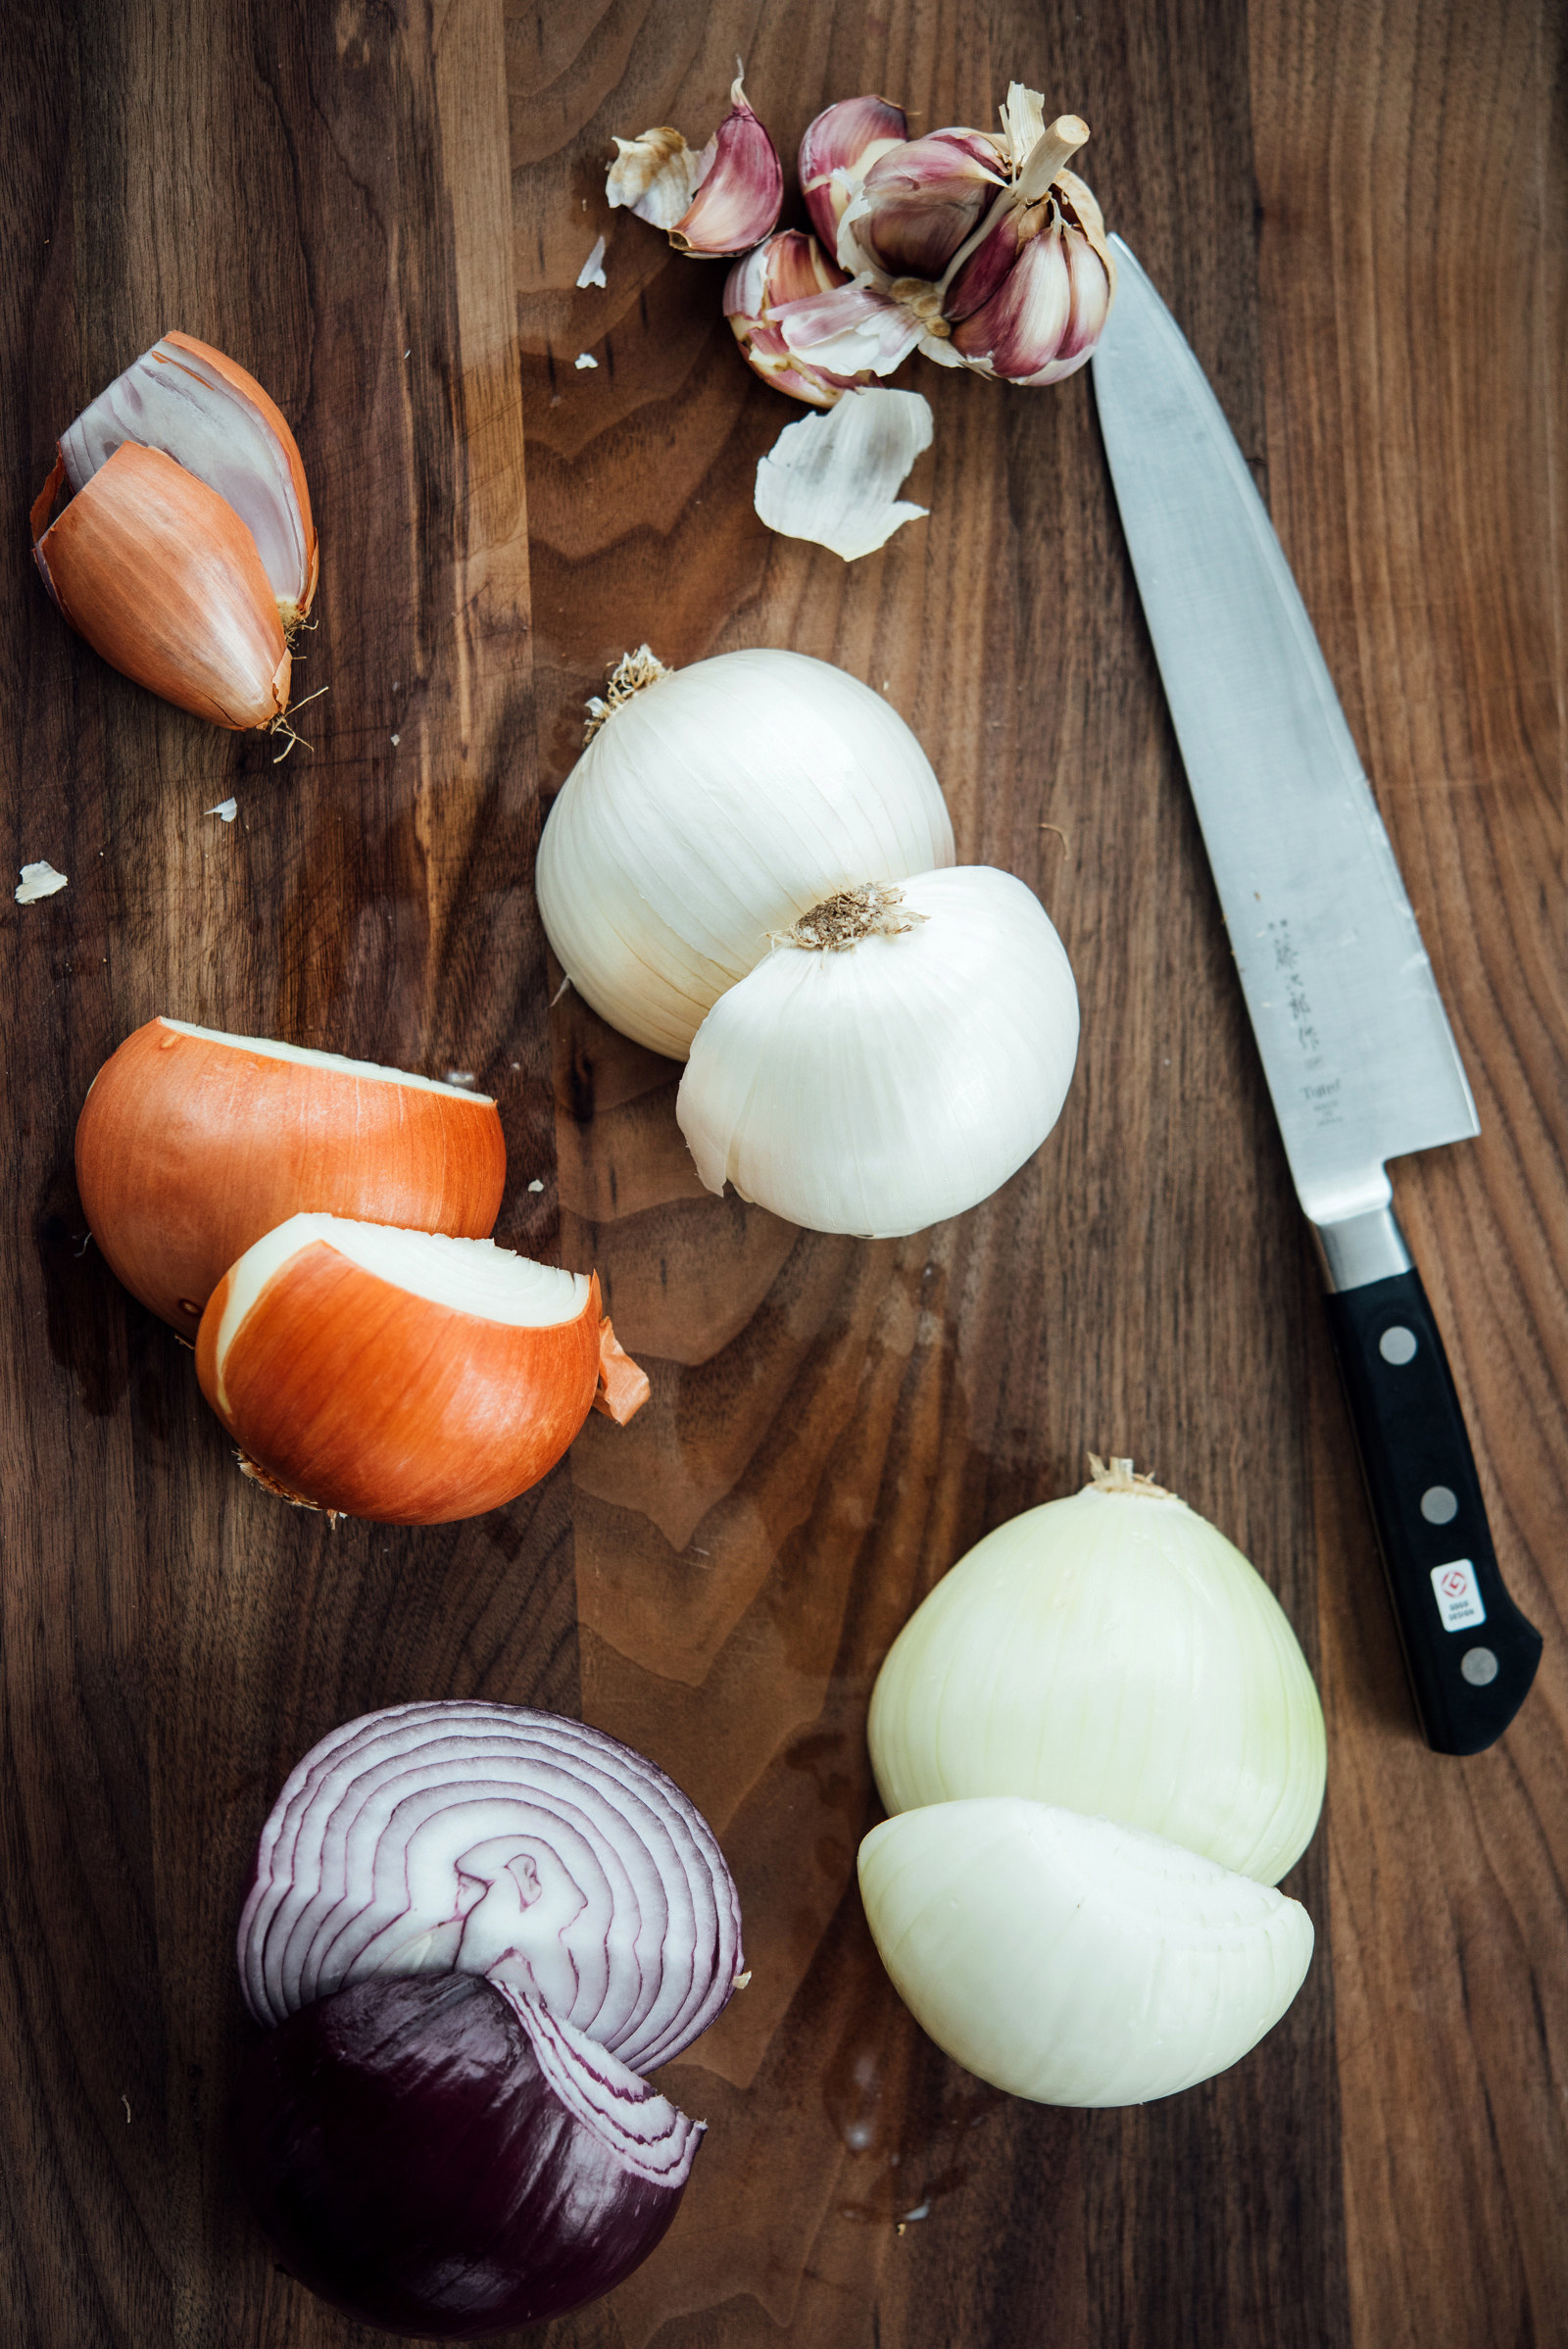 We Discovered The Absolute Best Way To Cut Onions Without Crying